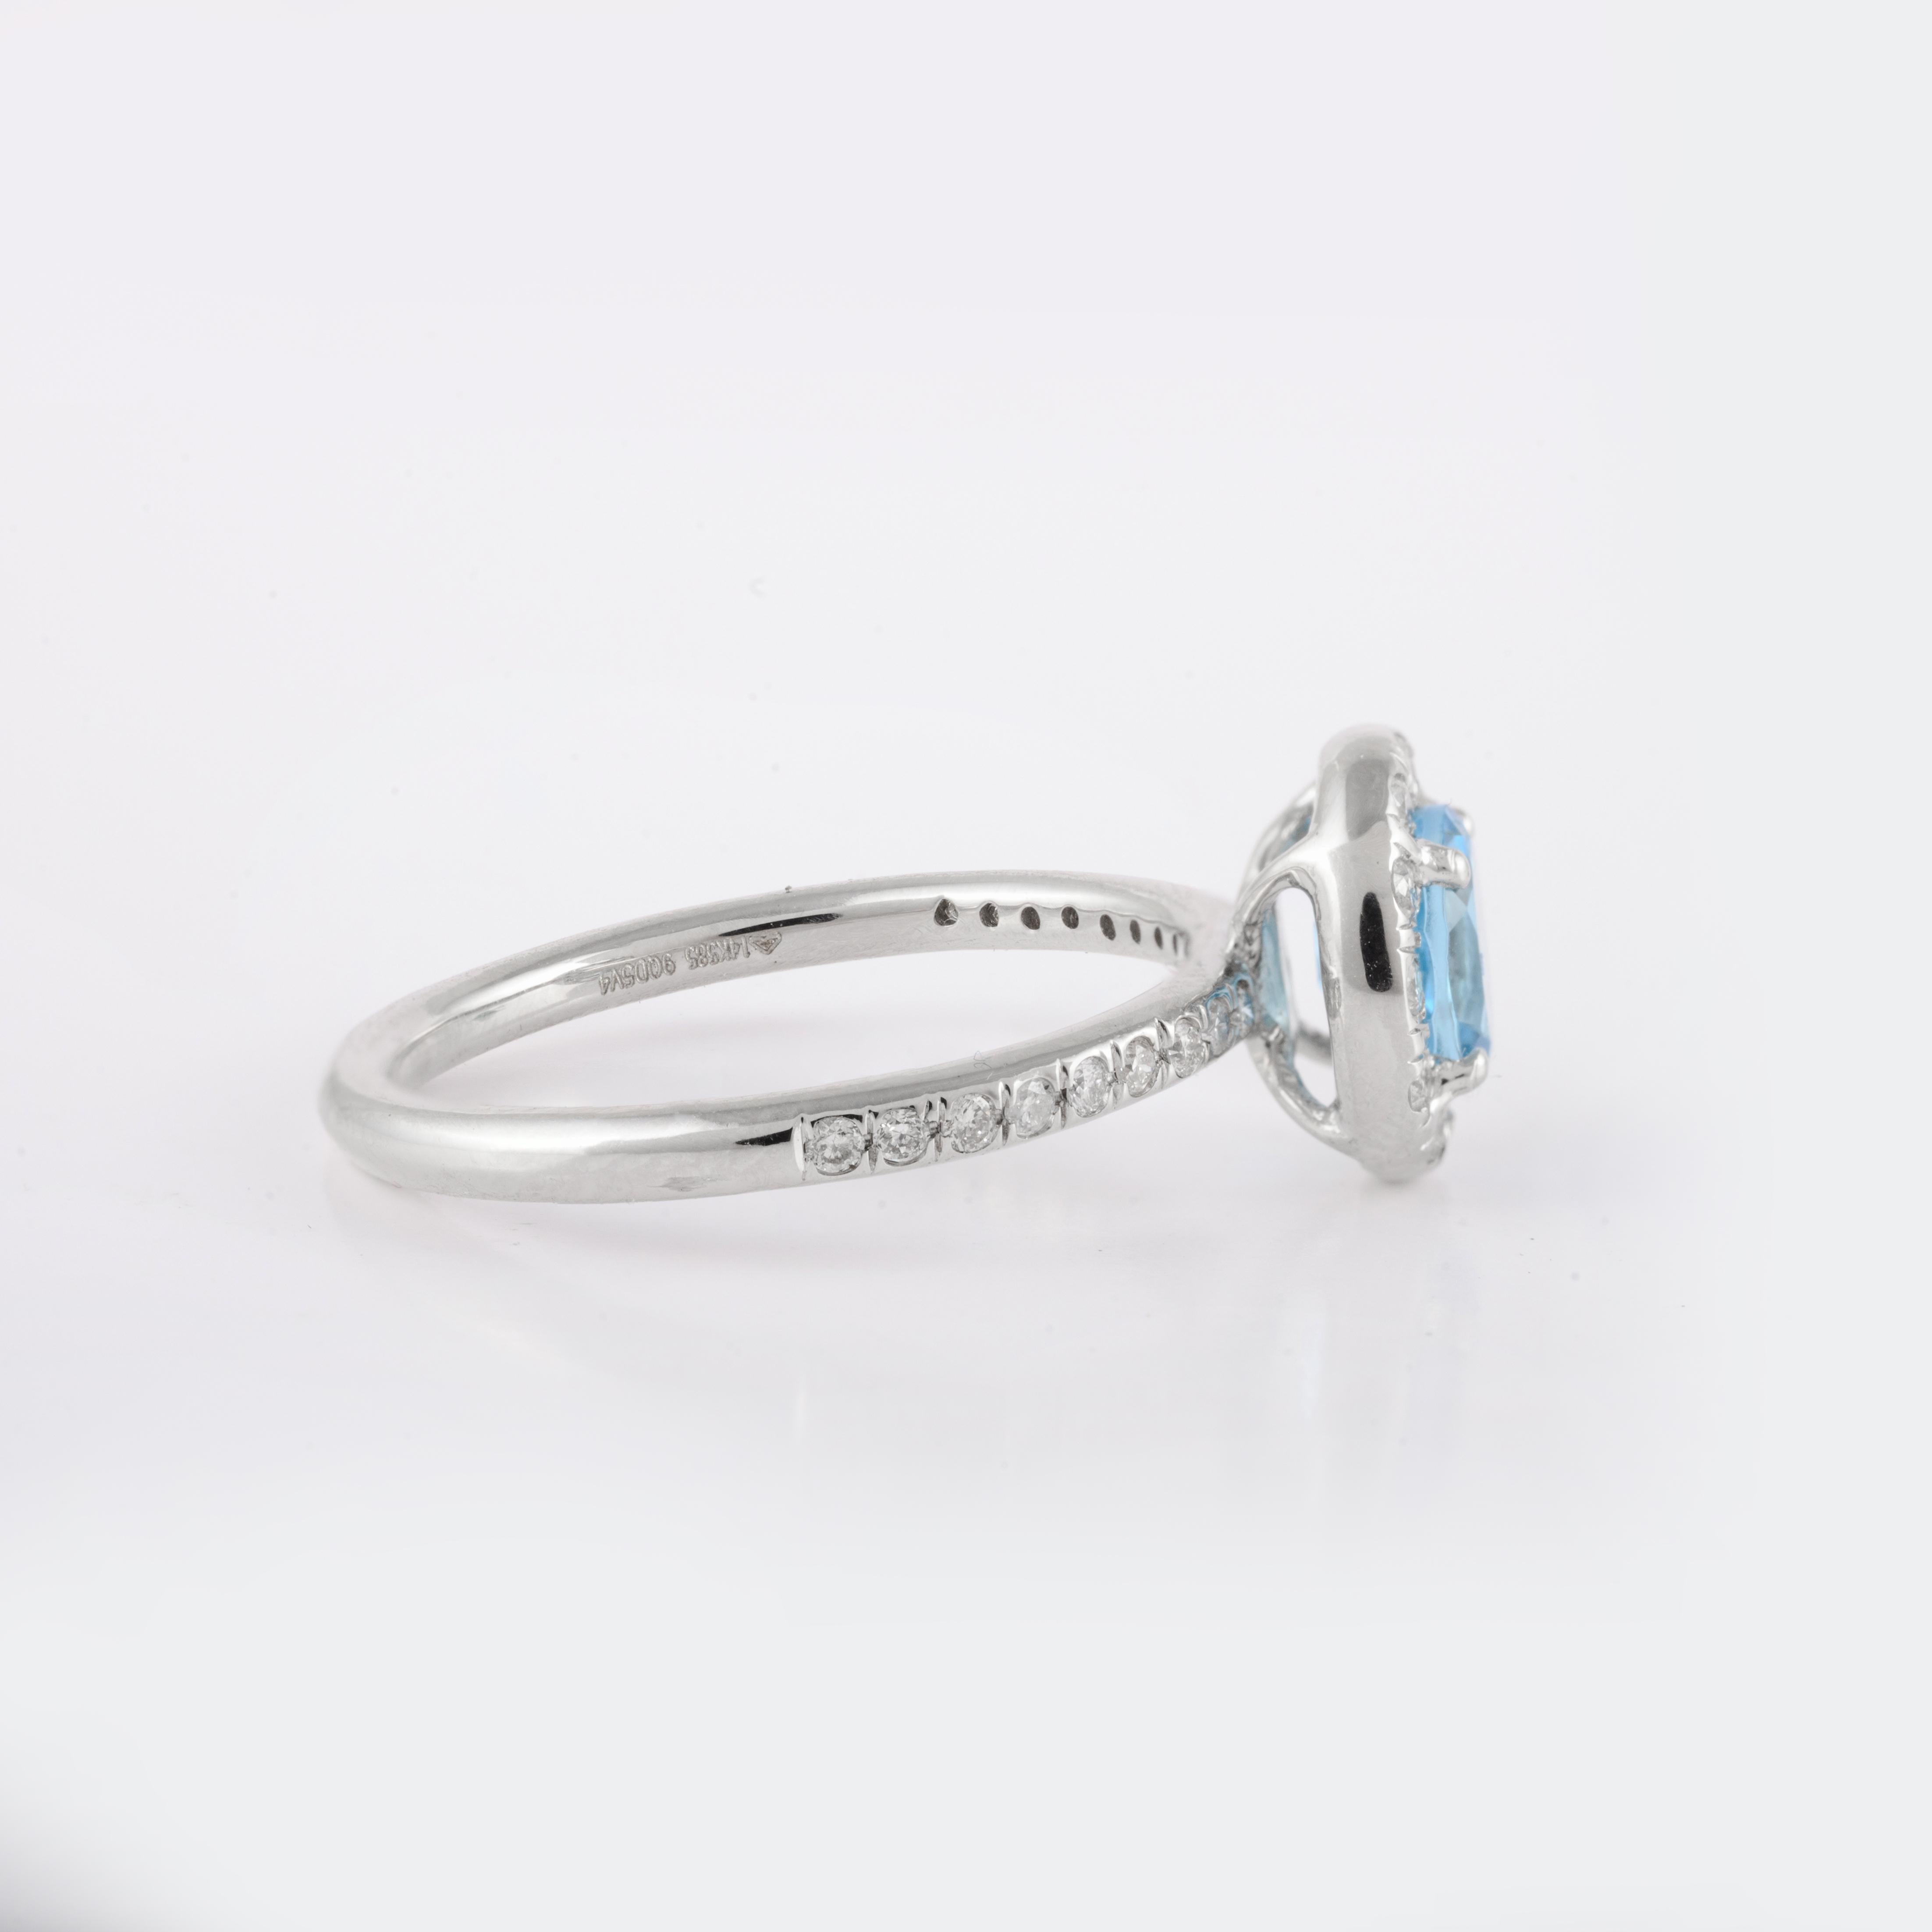 For Sale:  Real 14kt Solid White Gold Halo Diamond And Oval Cut Blue Topaz Ring For Her 8